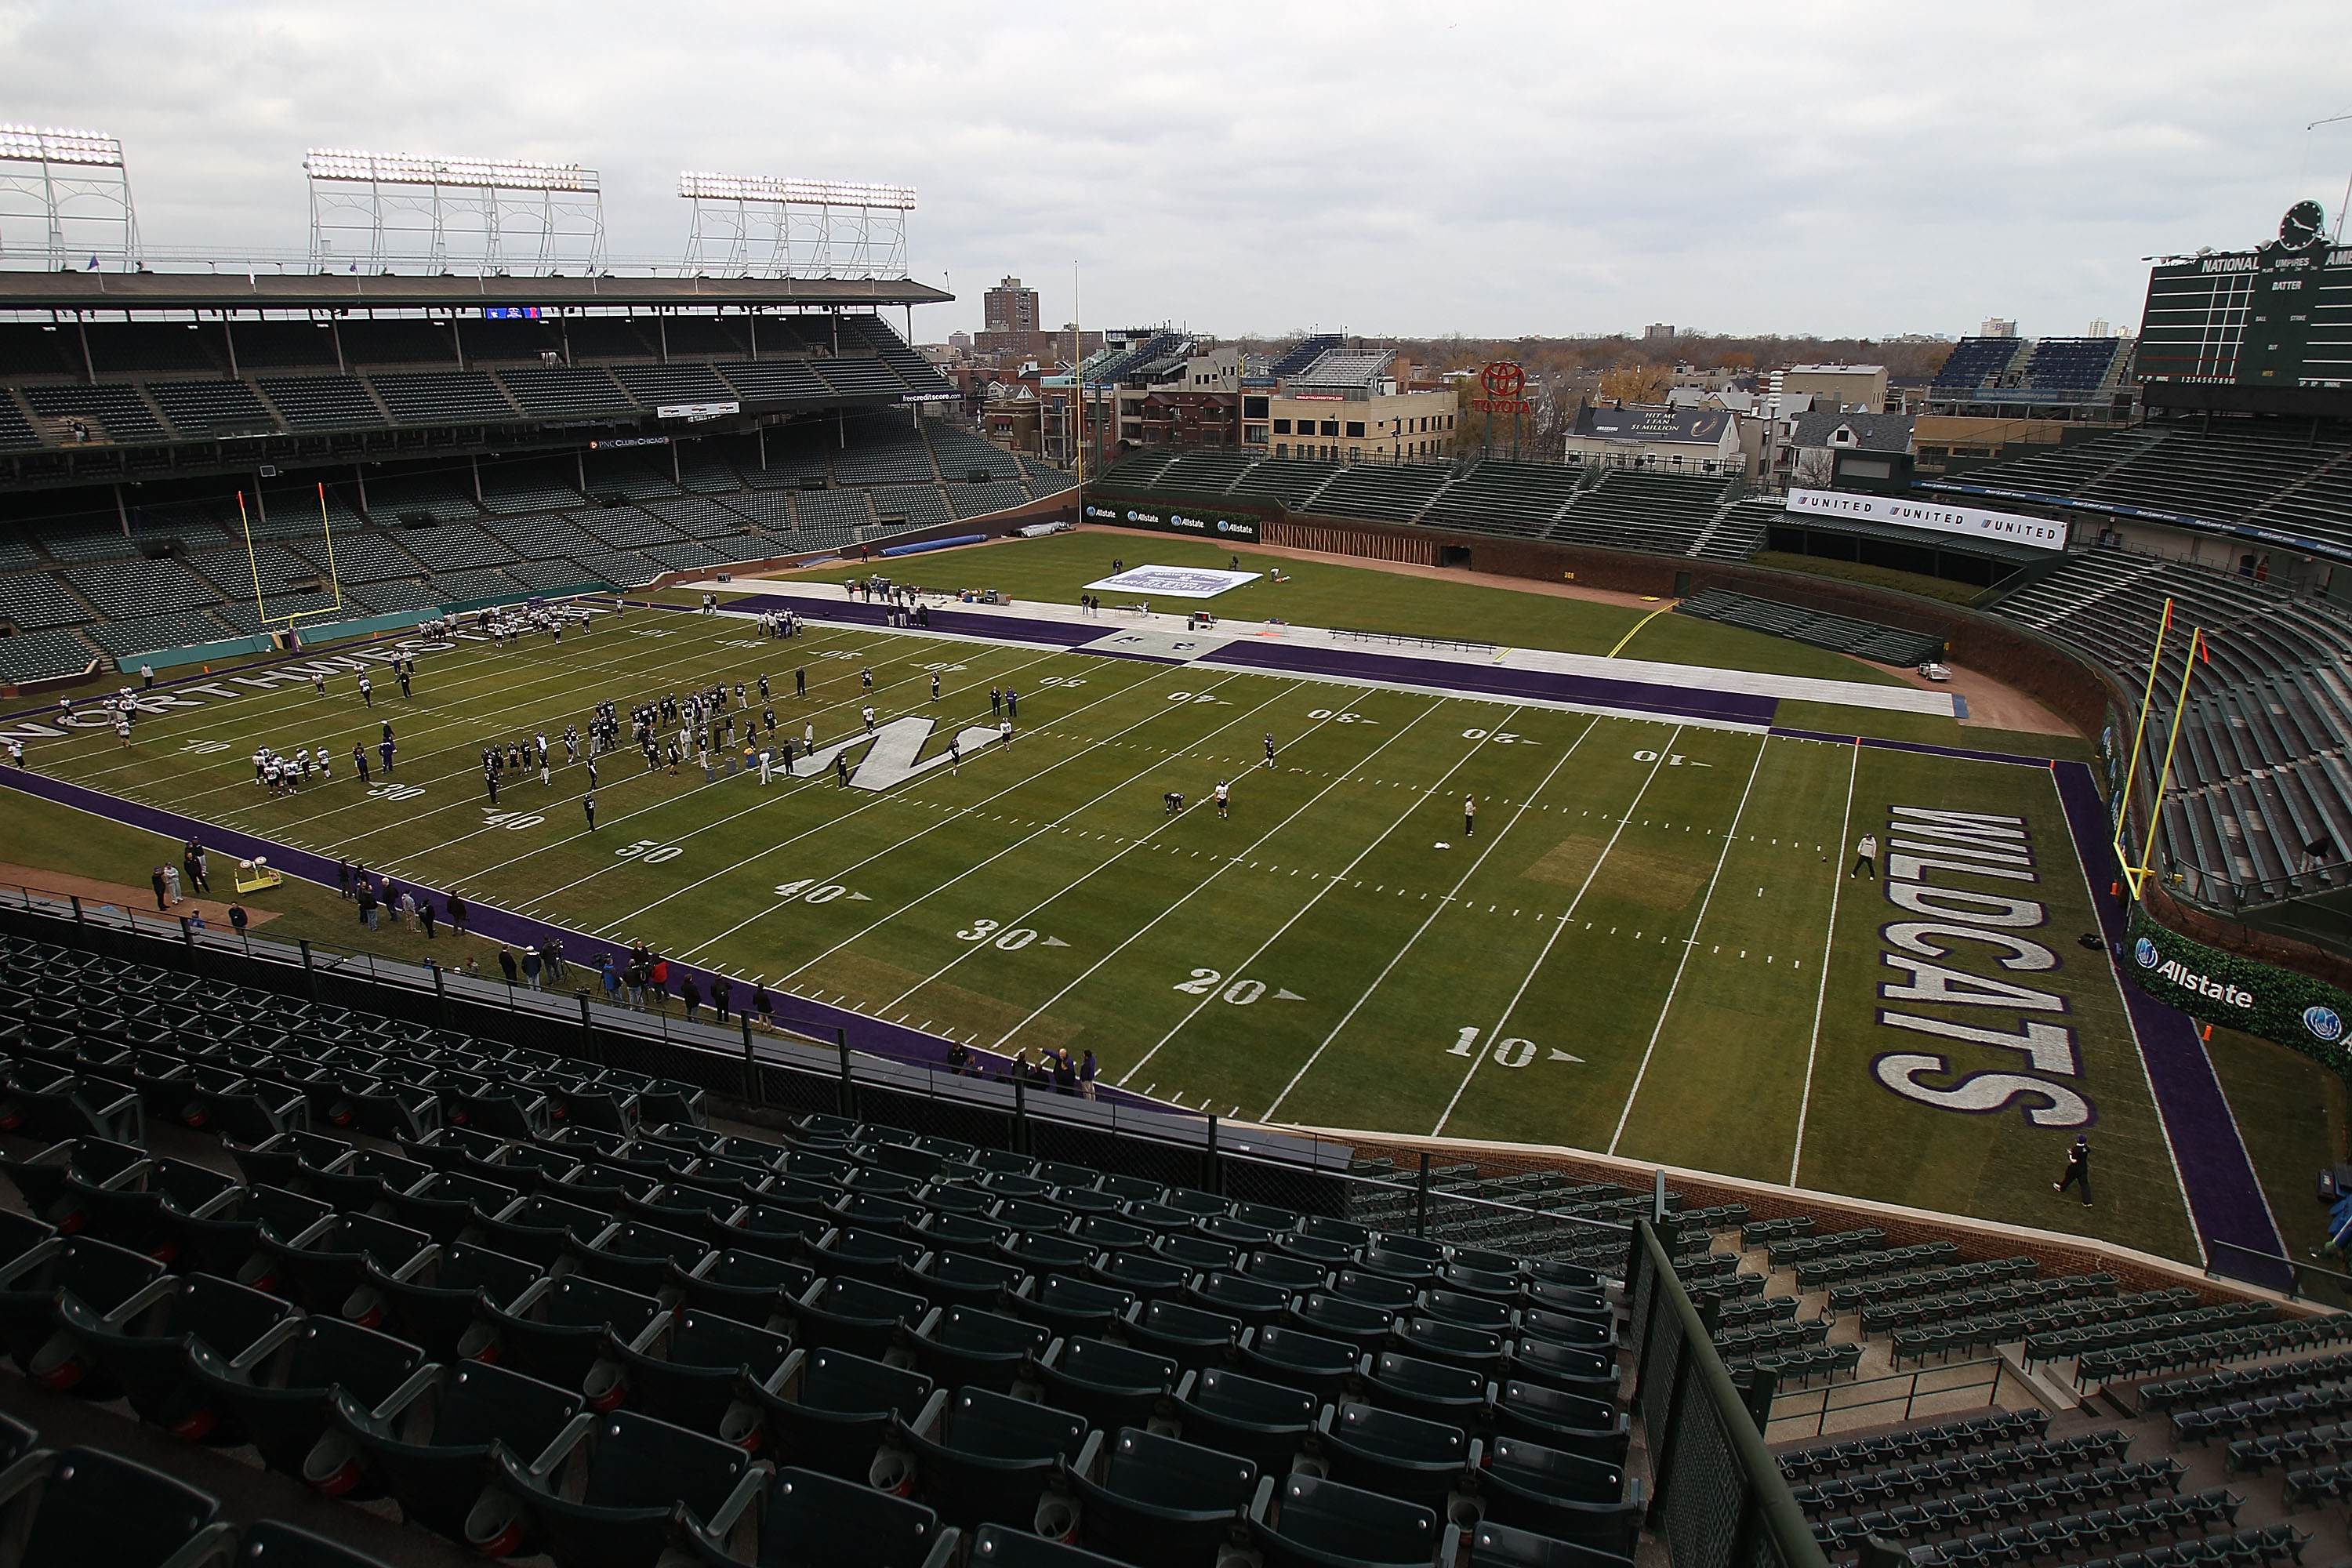 Wrigley Field Football: Why This Could Be the Coolest Sports Event